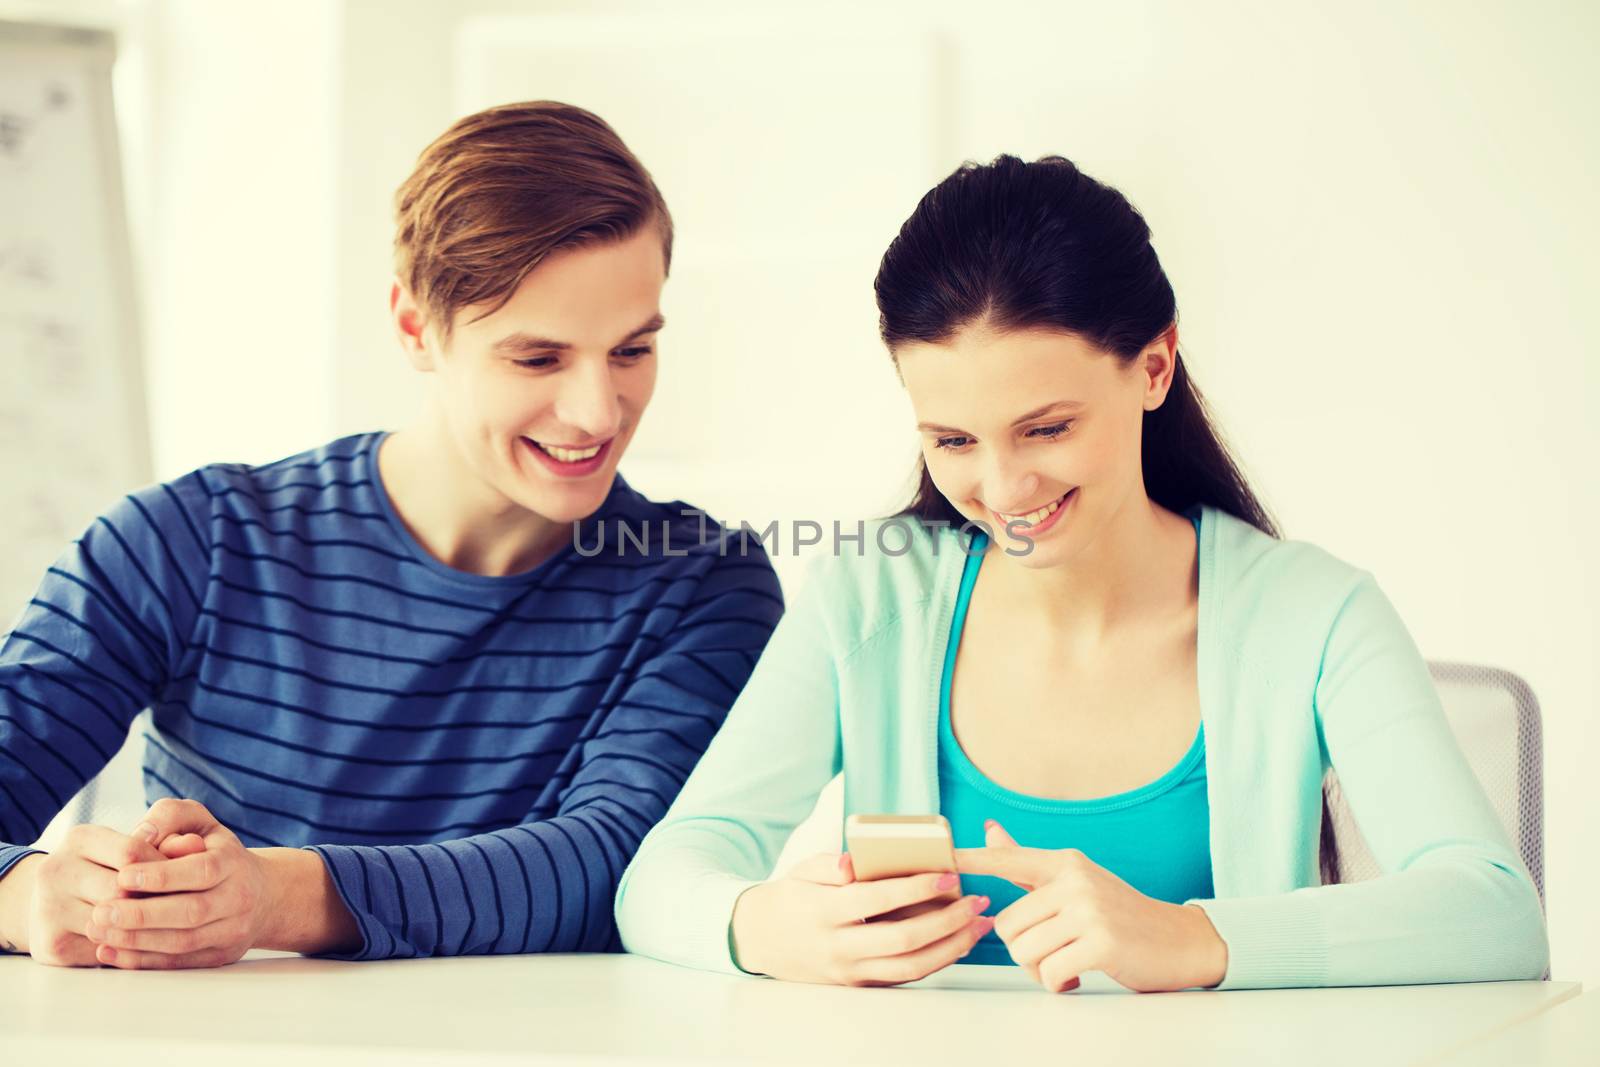 two smiling students with smartphone at school by dolgachov